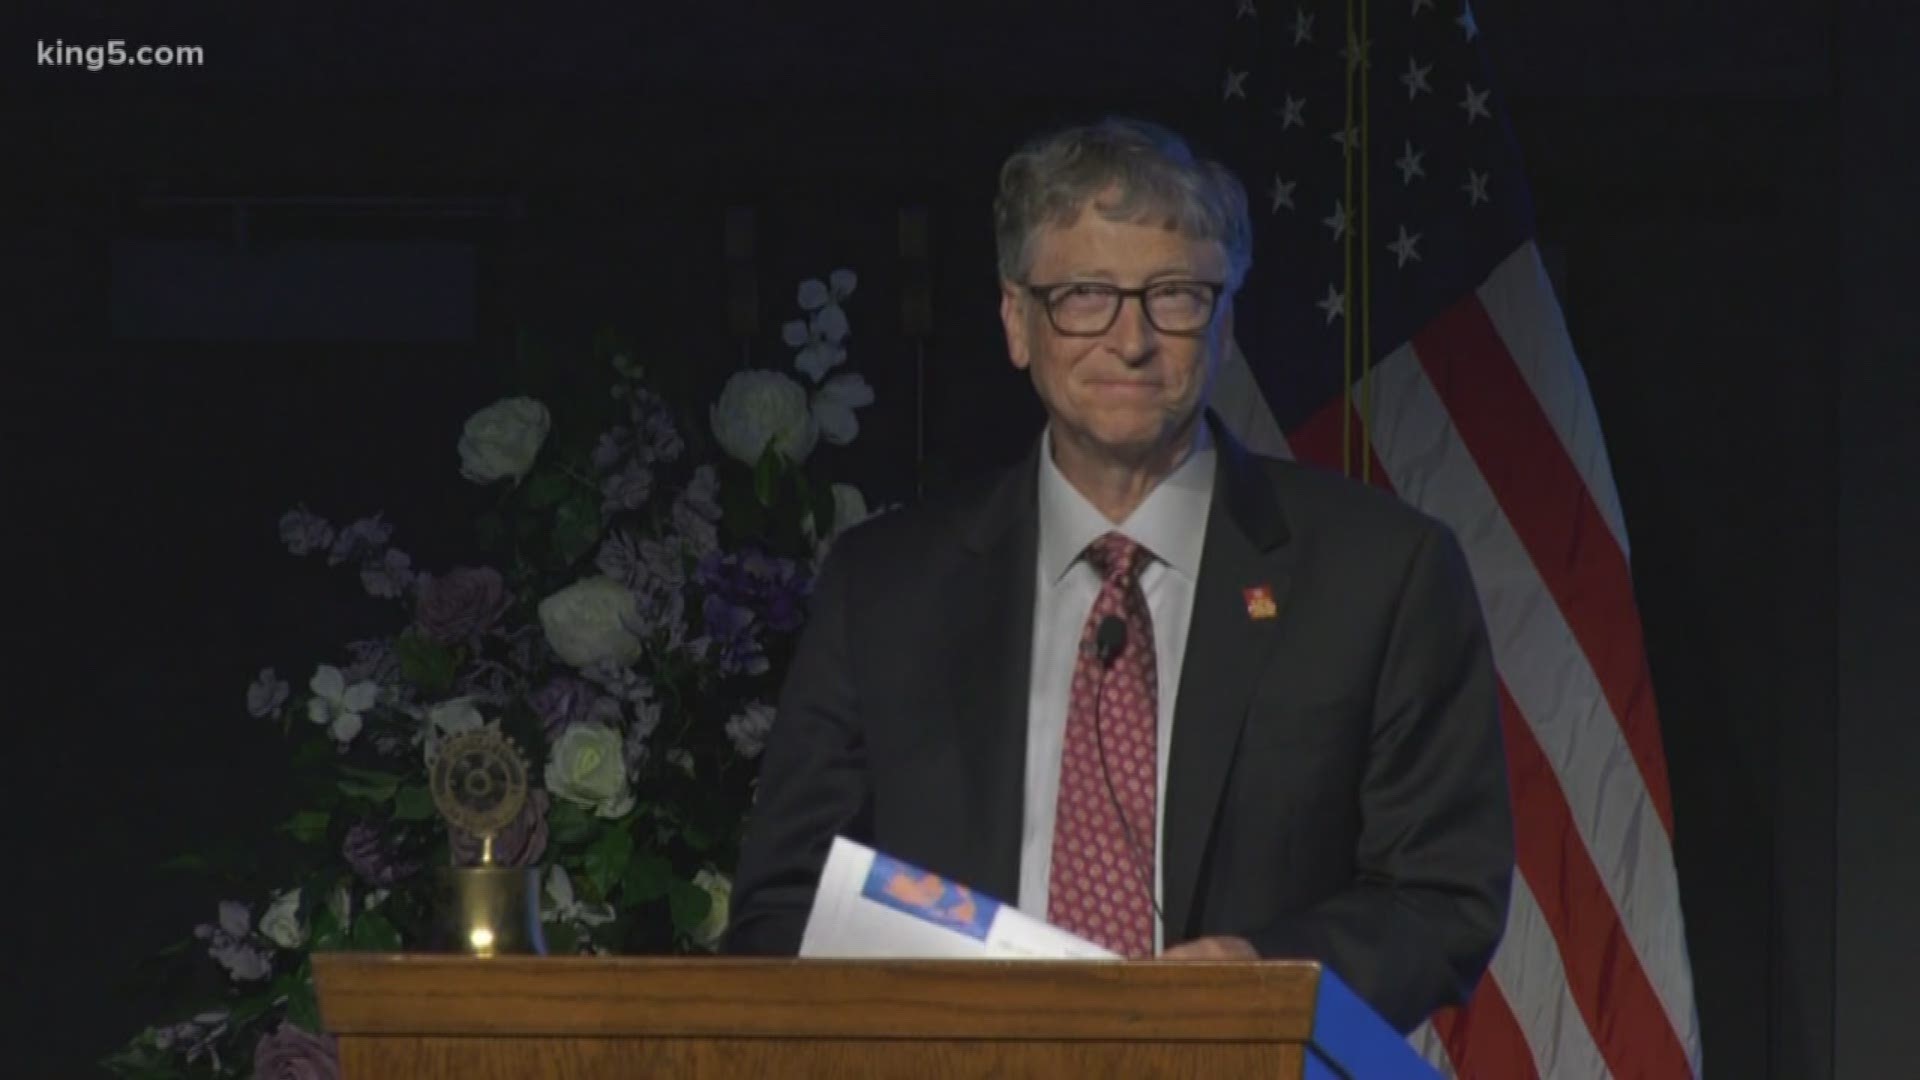 Bill Gates discussed how far the world has come in eradicating polio at the Rotary Conference at the Spokane Convention Center Saturday evening.